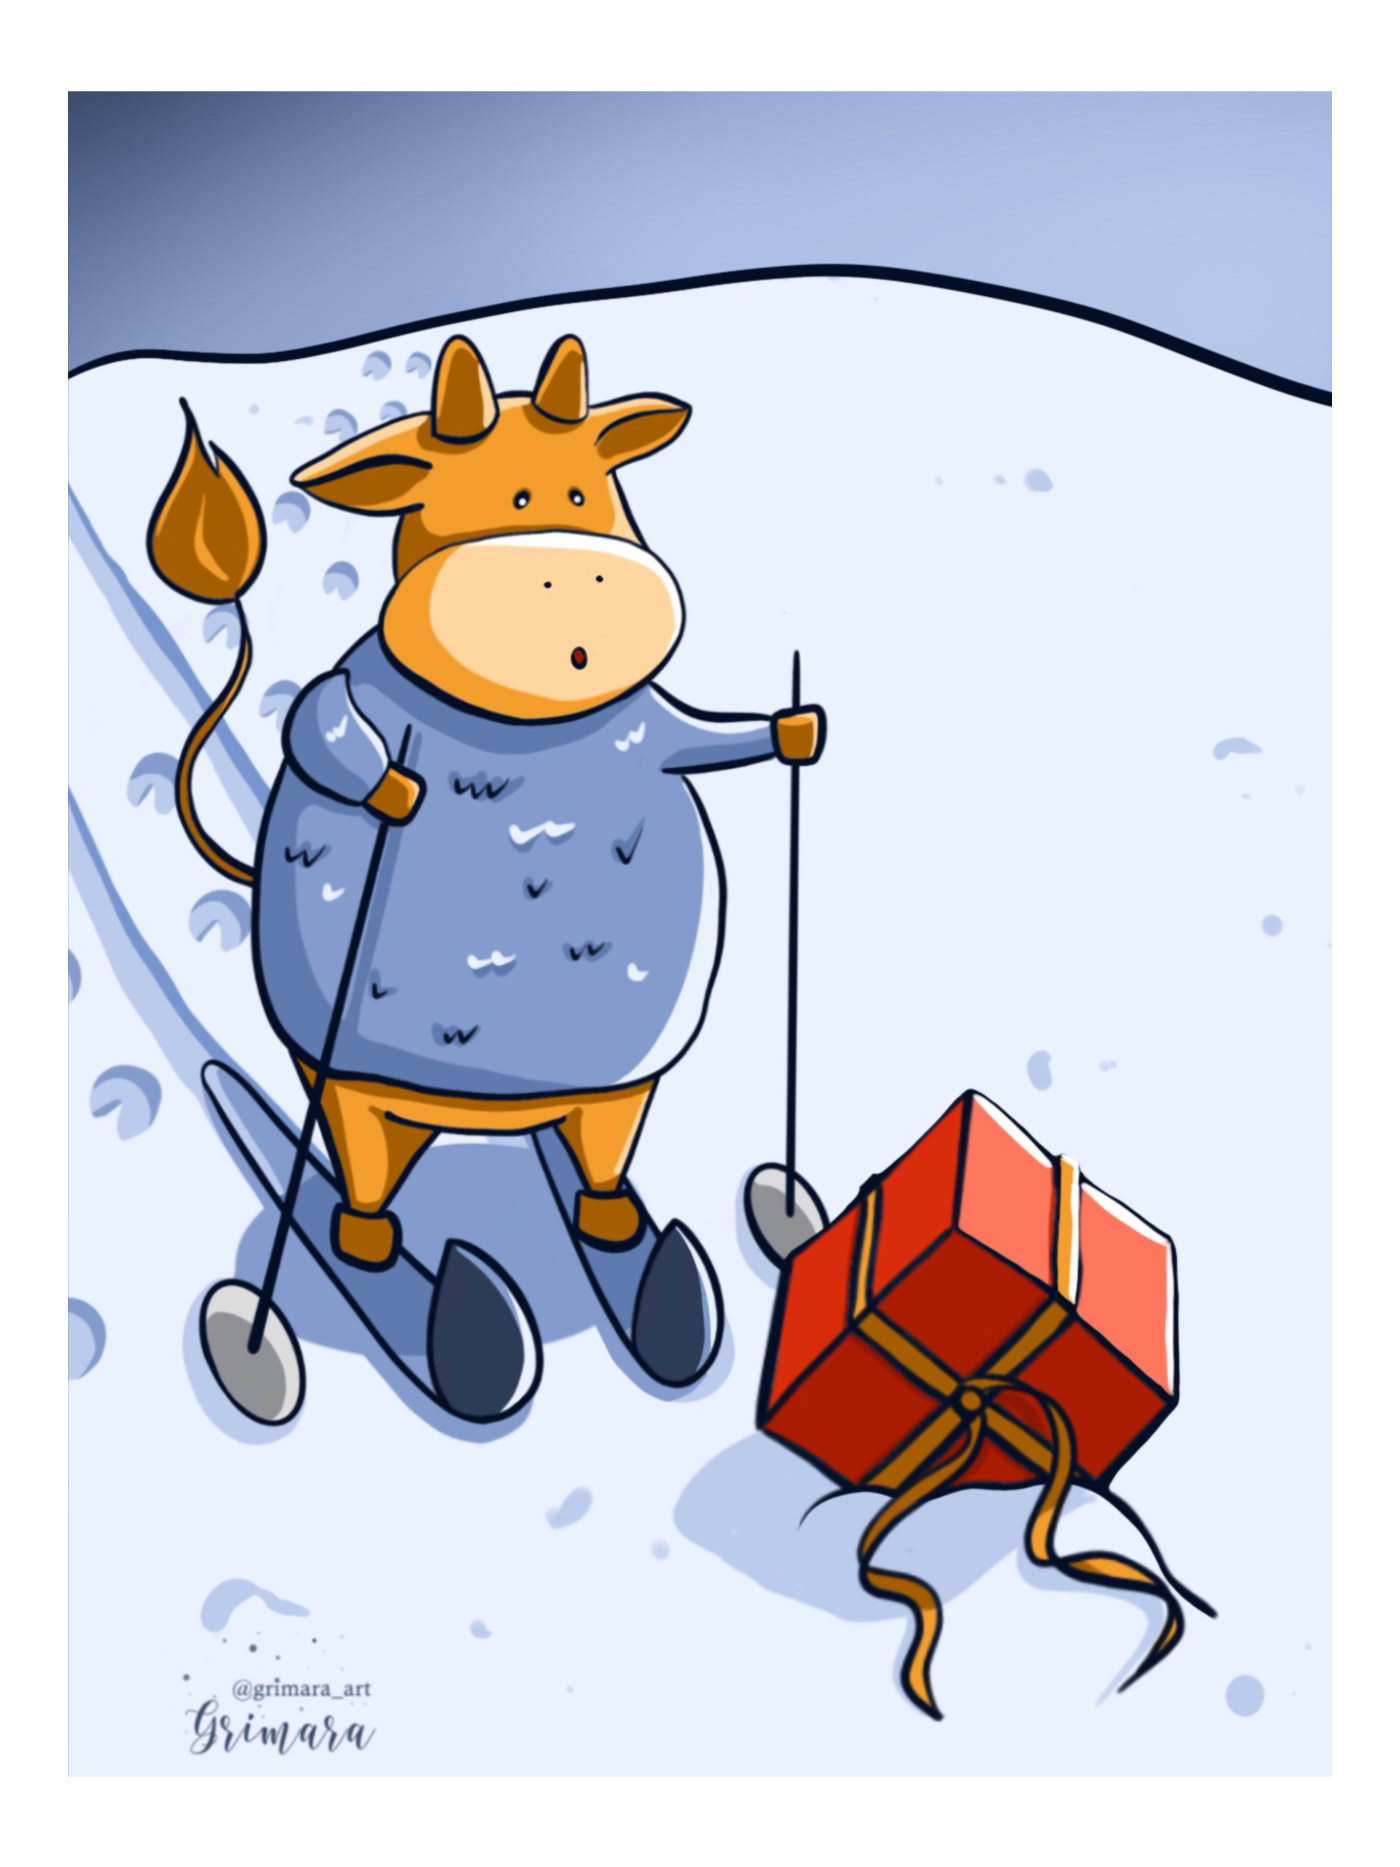 the bull finds a present